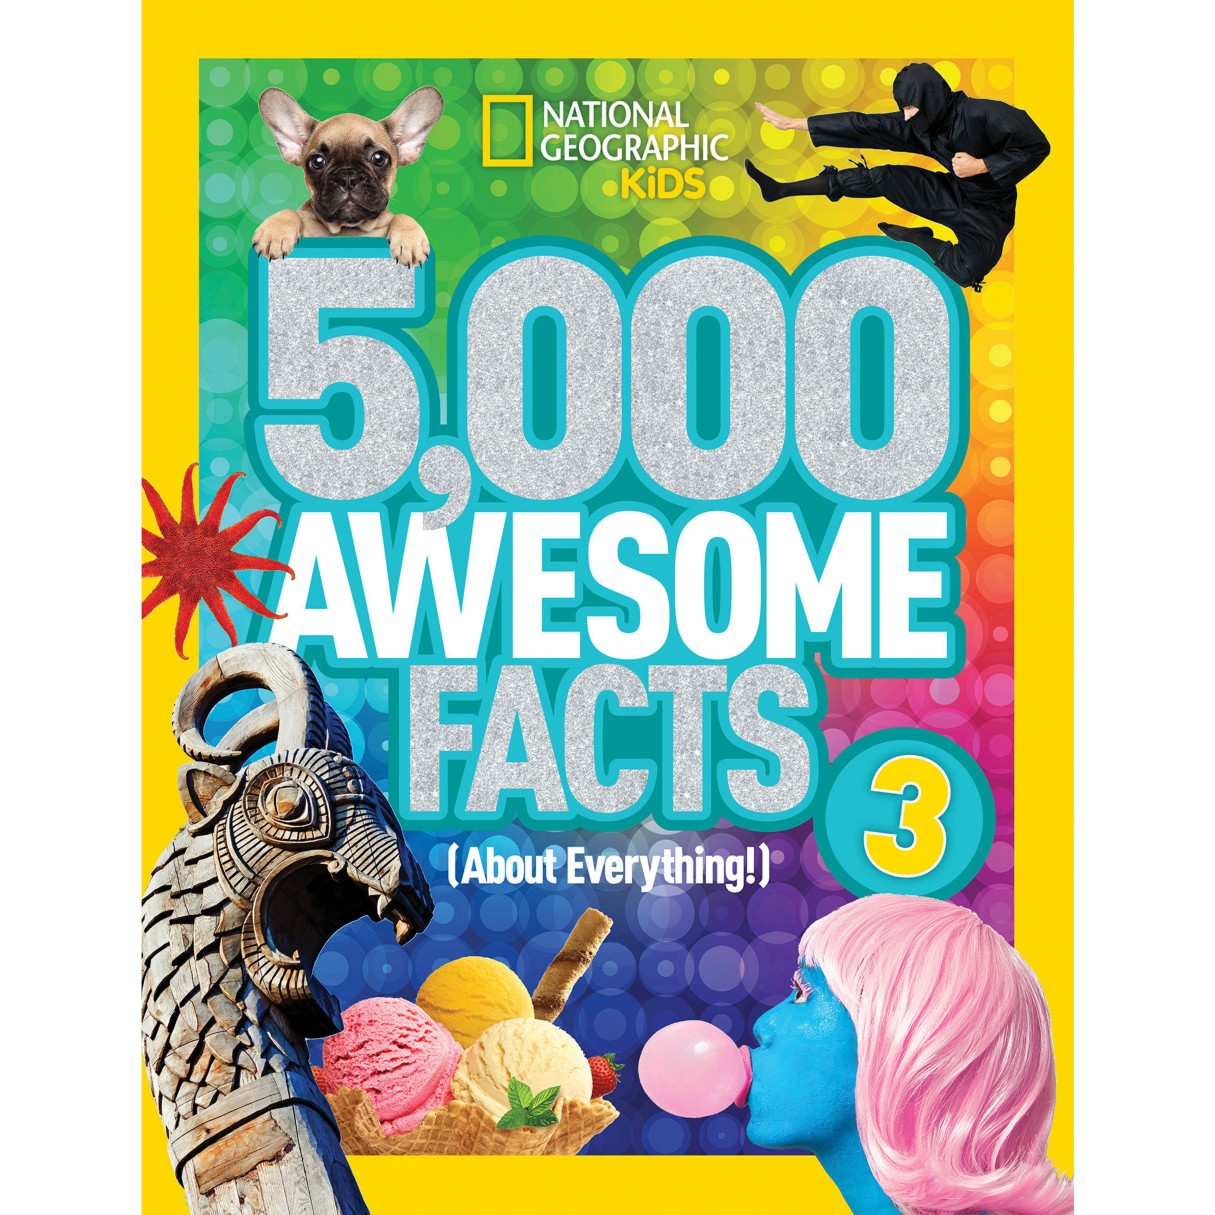 5,000 Awesome Facts (About Everything!) Volume 3 Book – National Geographic